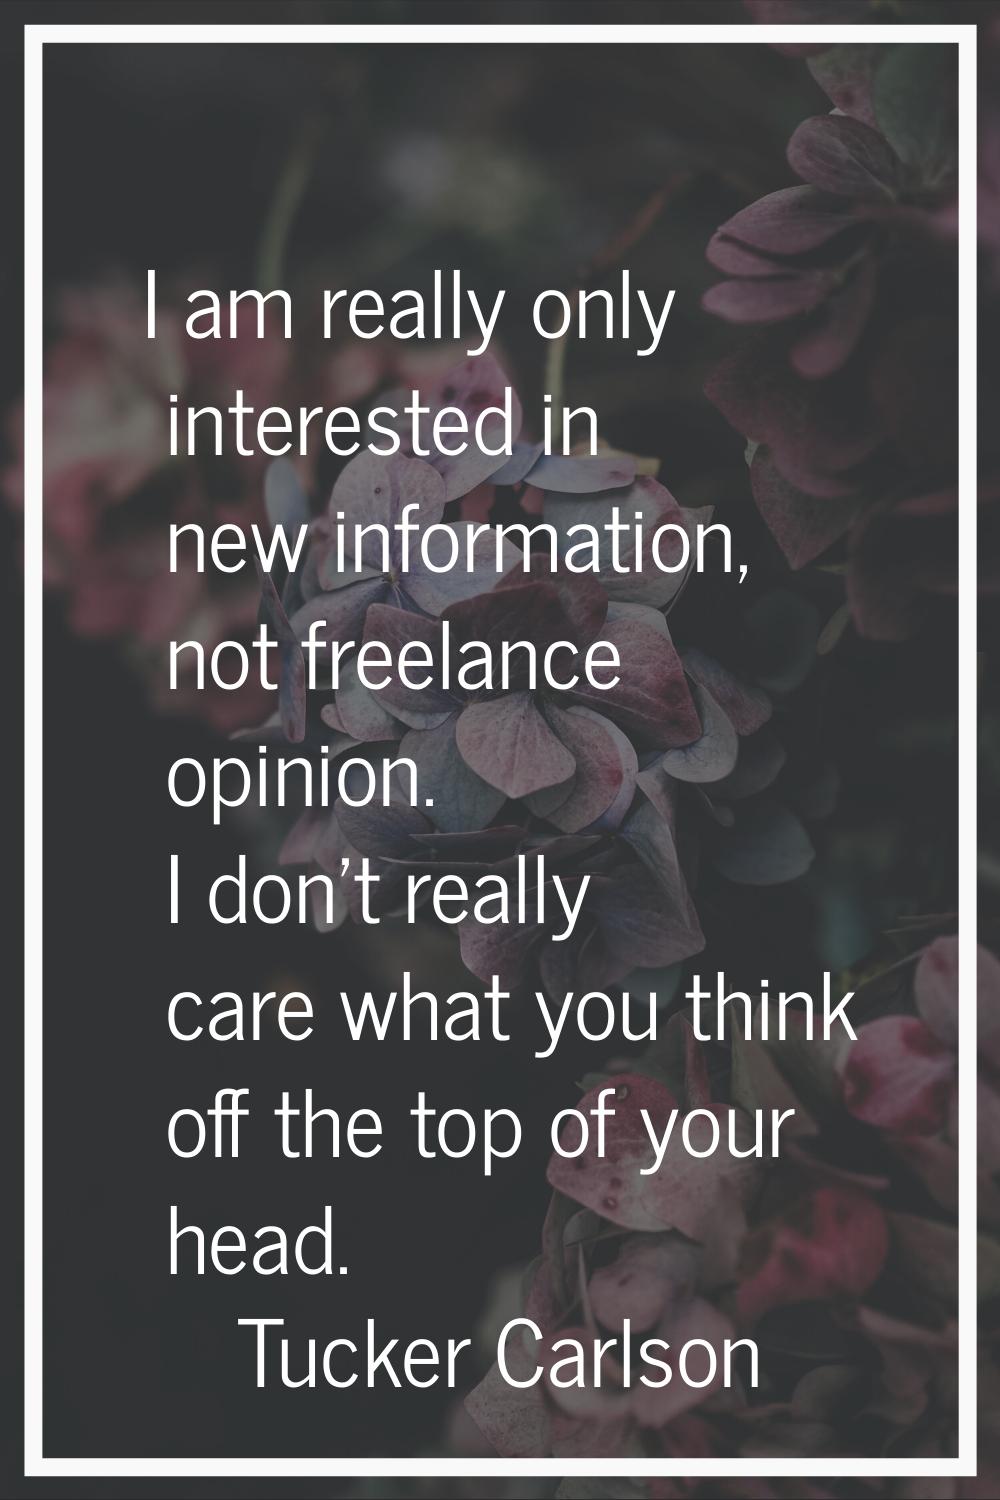 I am really only interested in new information, not freelance opinion. I don't really care what you